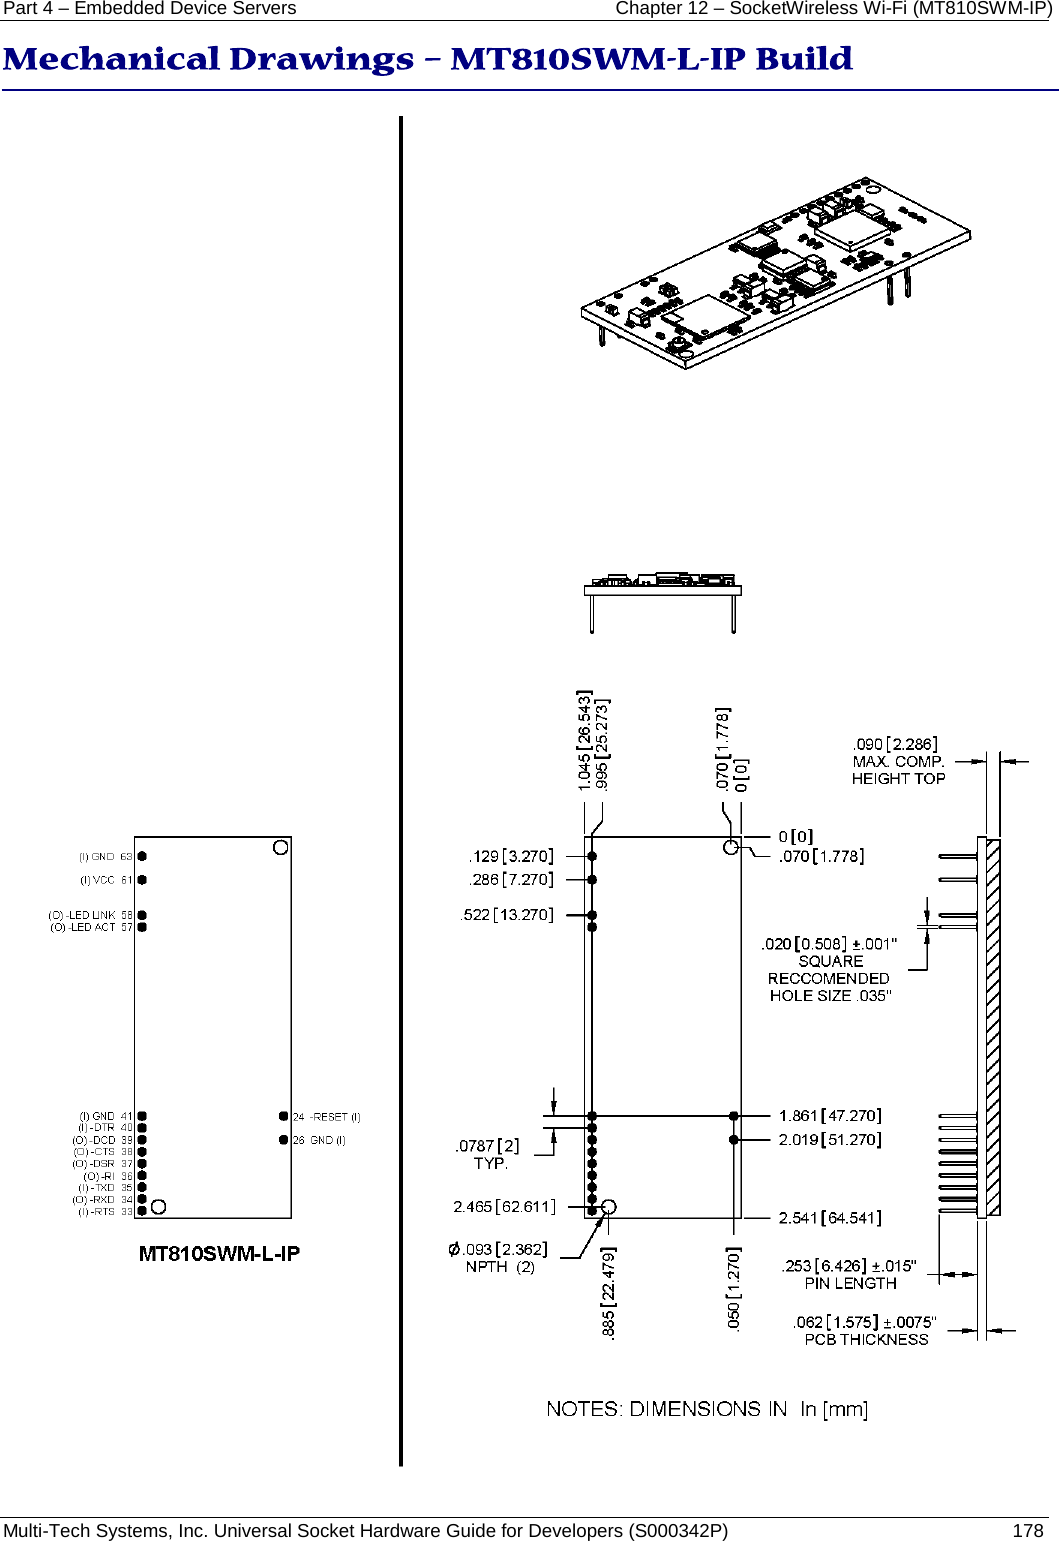 Part 4 – Embedded Device Servers Chapter 12 – SocketWireless Wi-Fi (MT810SWM-IP) Multi-Tech Systems, Inc. Universal Socket Hardware Guide for Developers (S000342P)  178  Mechanical Drawings – MT810SWM-L-IP Build  